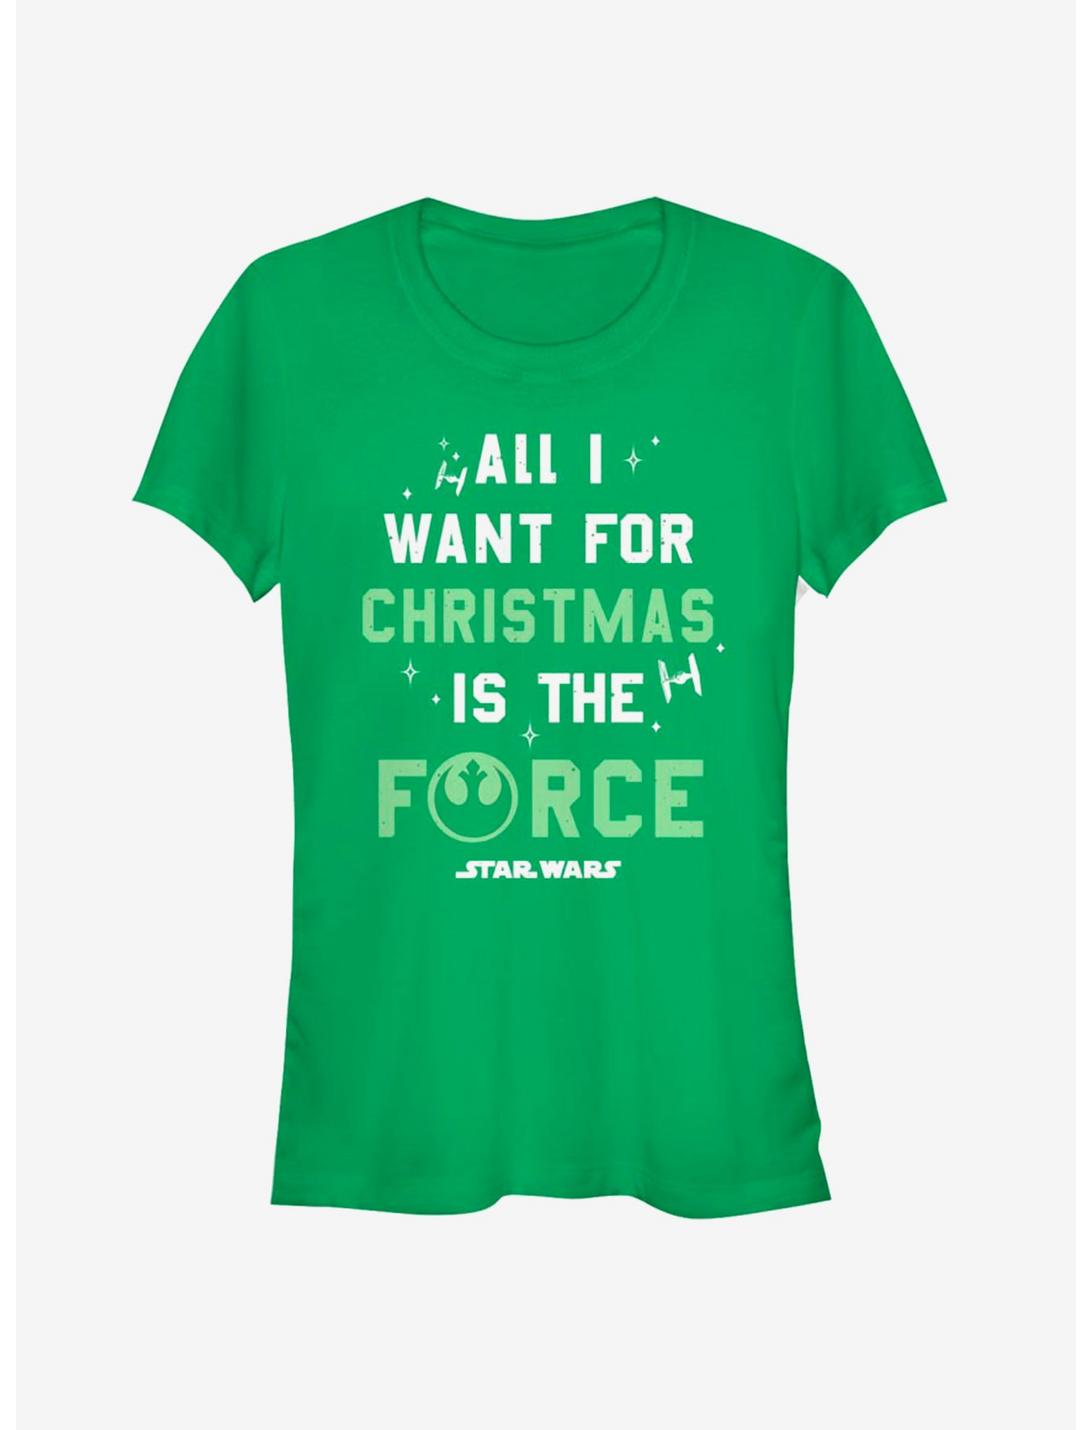 Star Wars Want the Force Christmas Girls T-Shirt, KELLY, hi-res